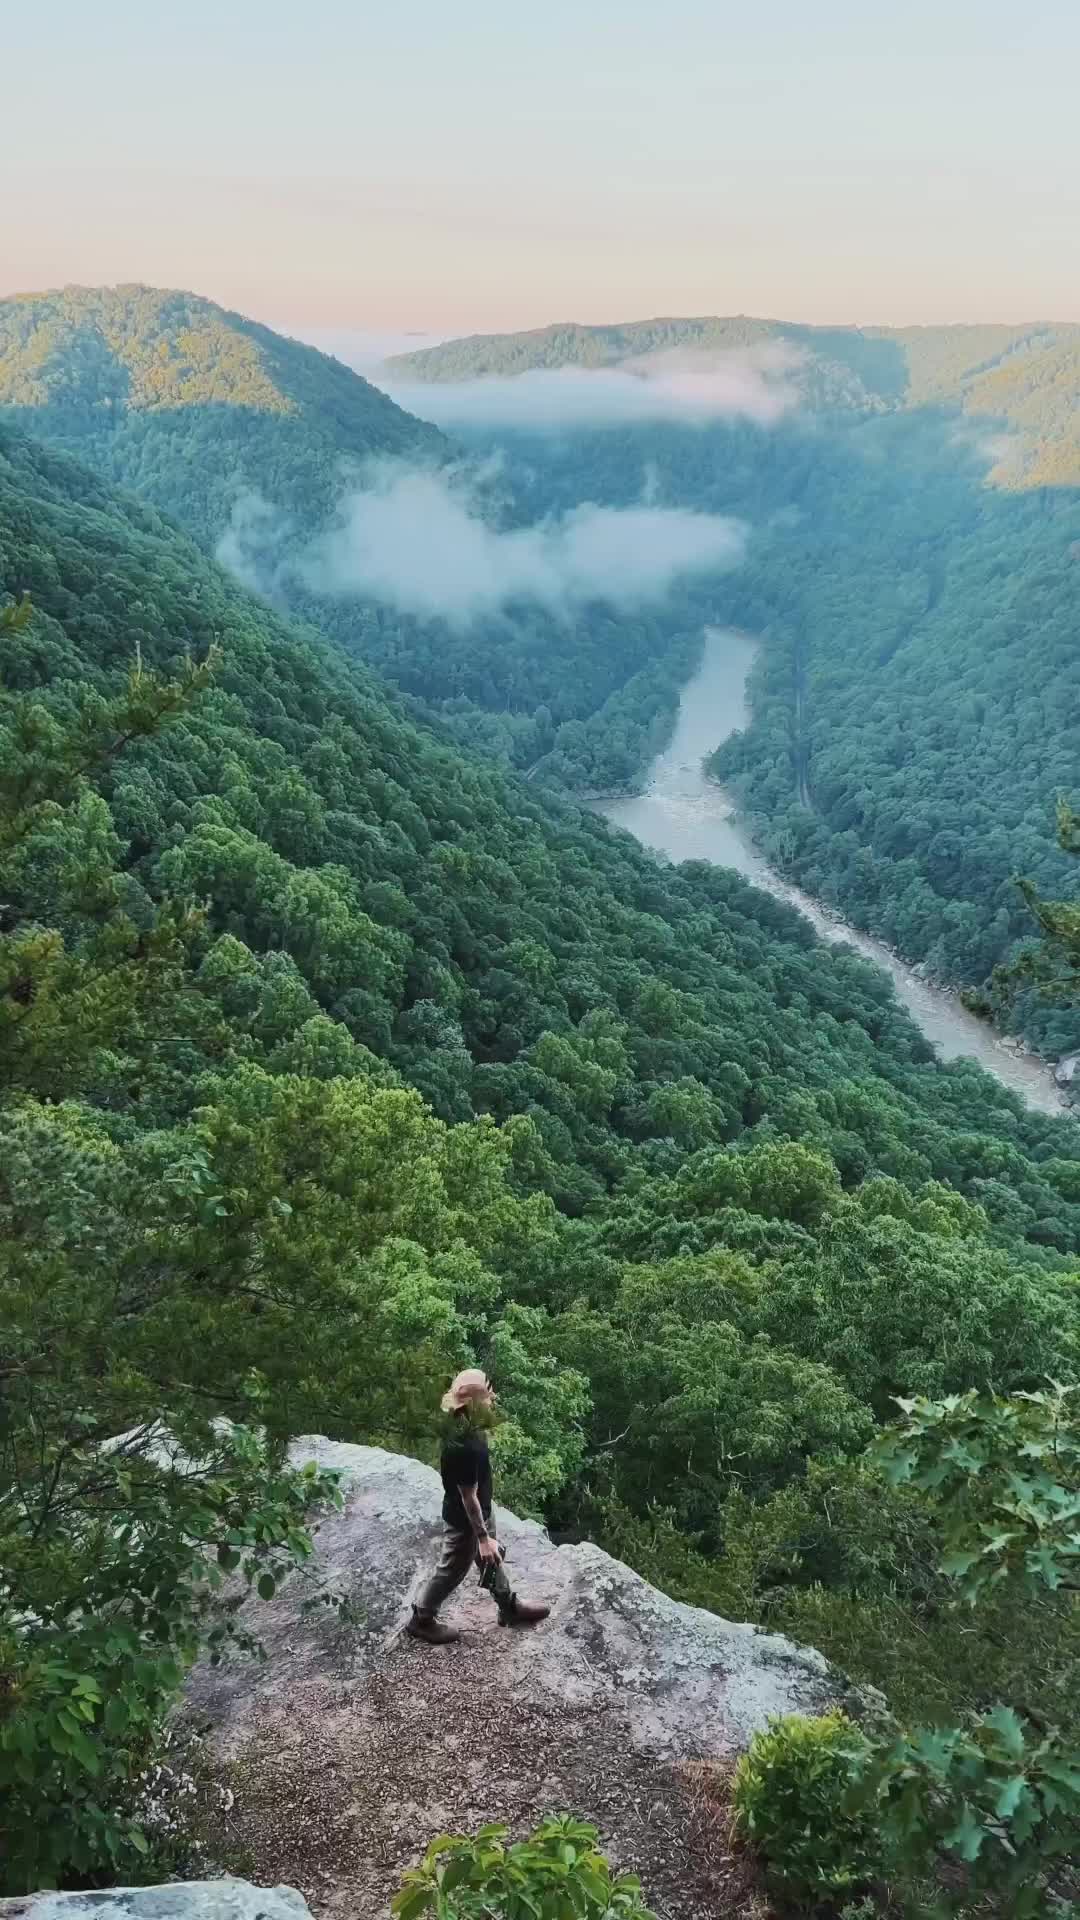 Wild Adventures in New River Gorge, WV